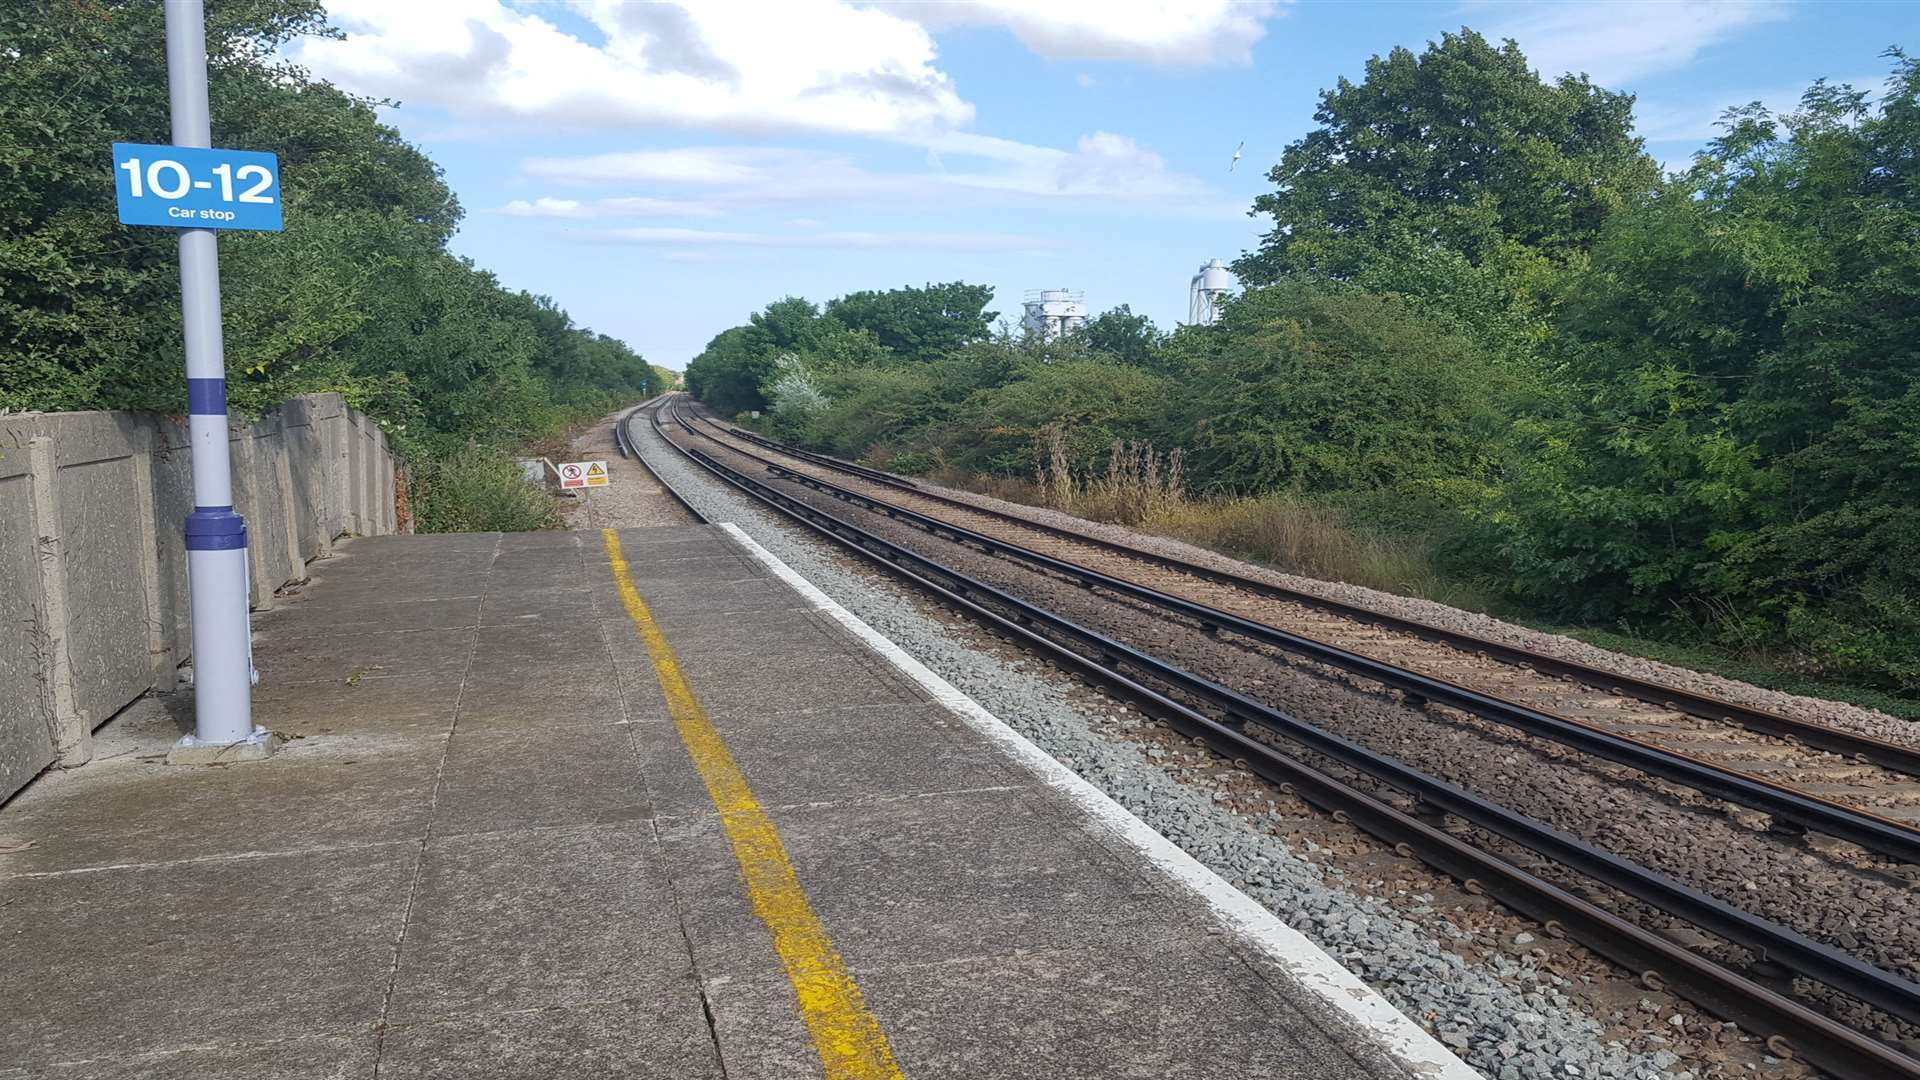 The scene from the platform at Herne Bay railway station near where Taiyah was found